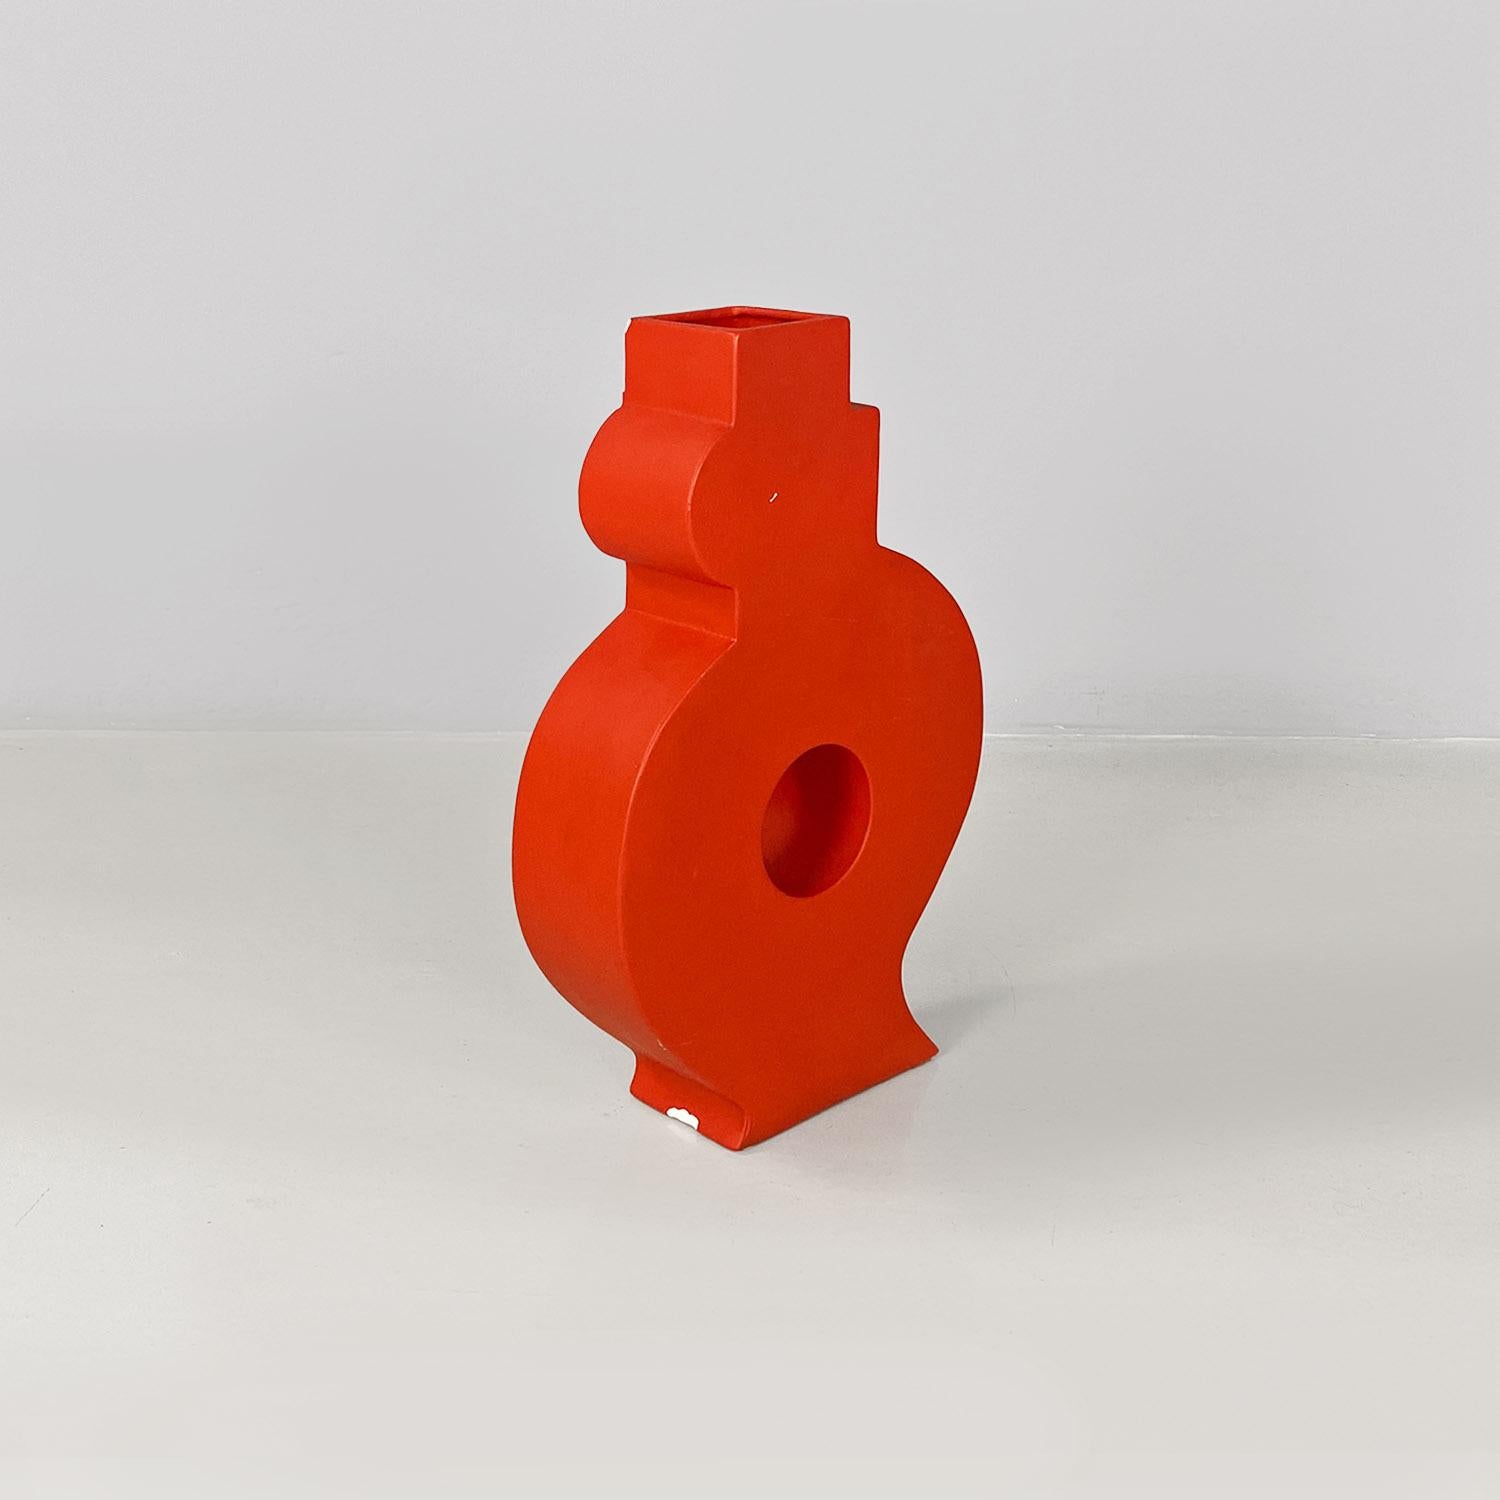 Italian modern red ceramic Picassa vase sculpture by Florio Pac Paccagnella 2023 For Sale 7